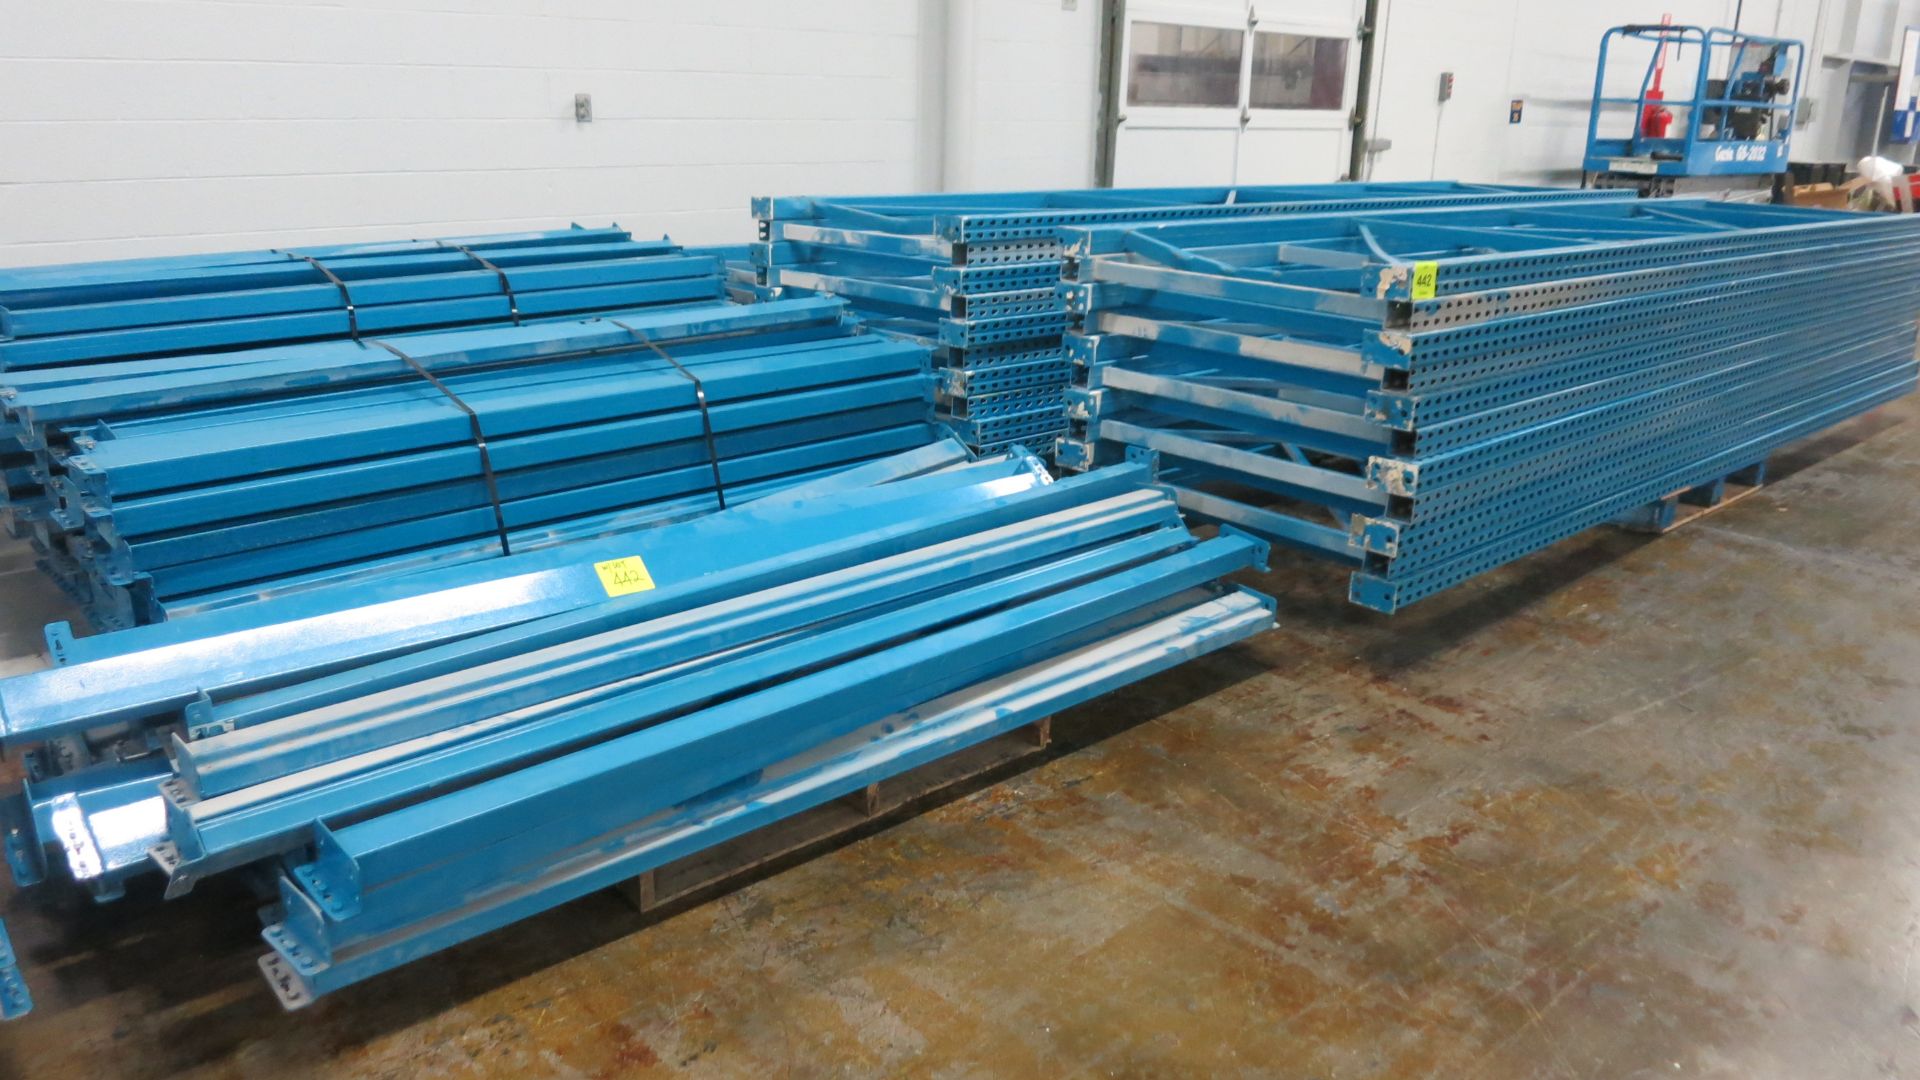 [Lot] 27-Sections pallet racks, with (29) uprights x 16', (135) cross beams x 8 ' (disassemble